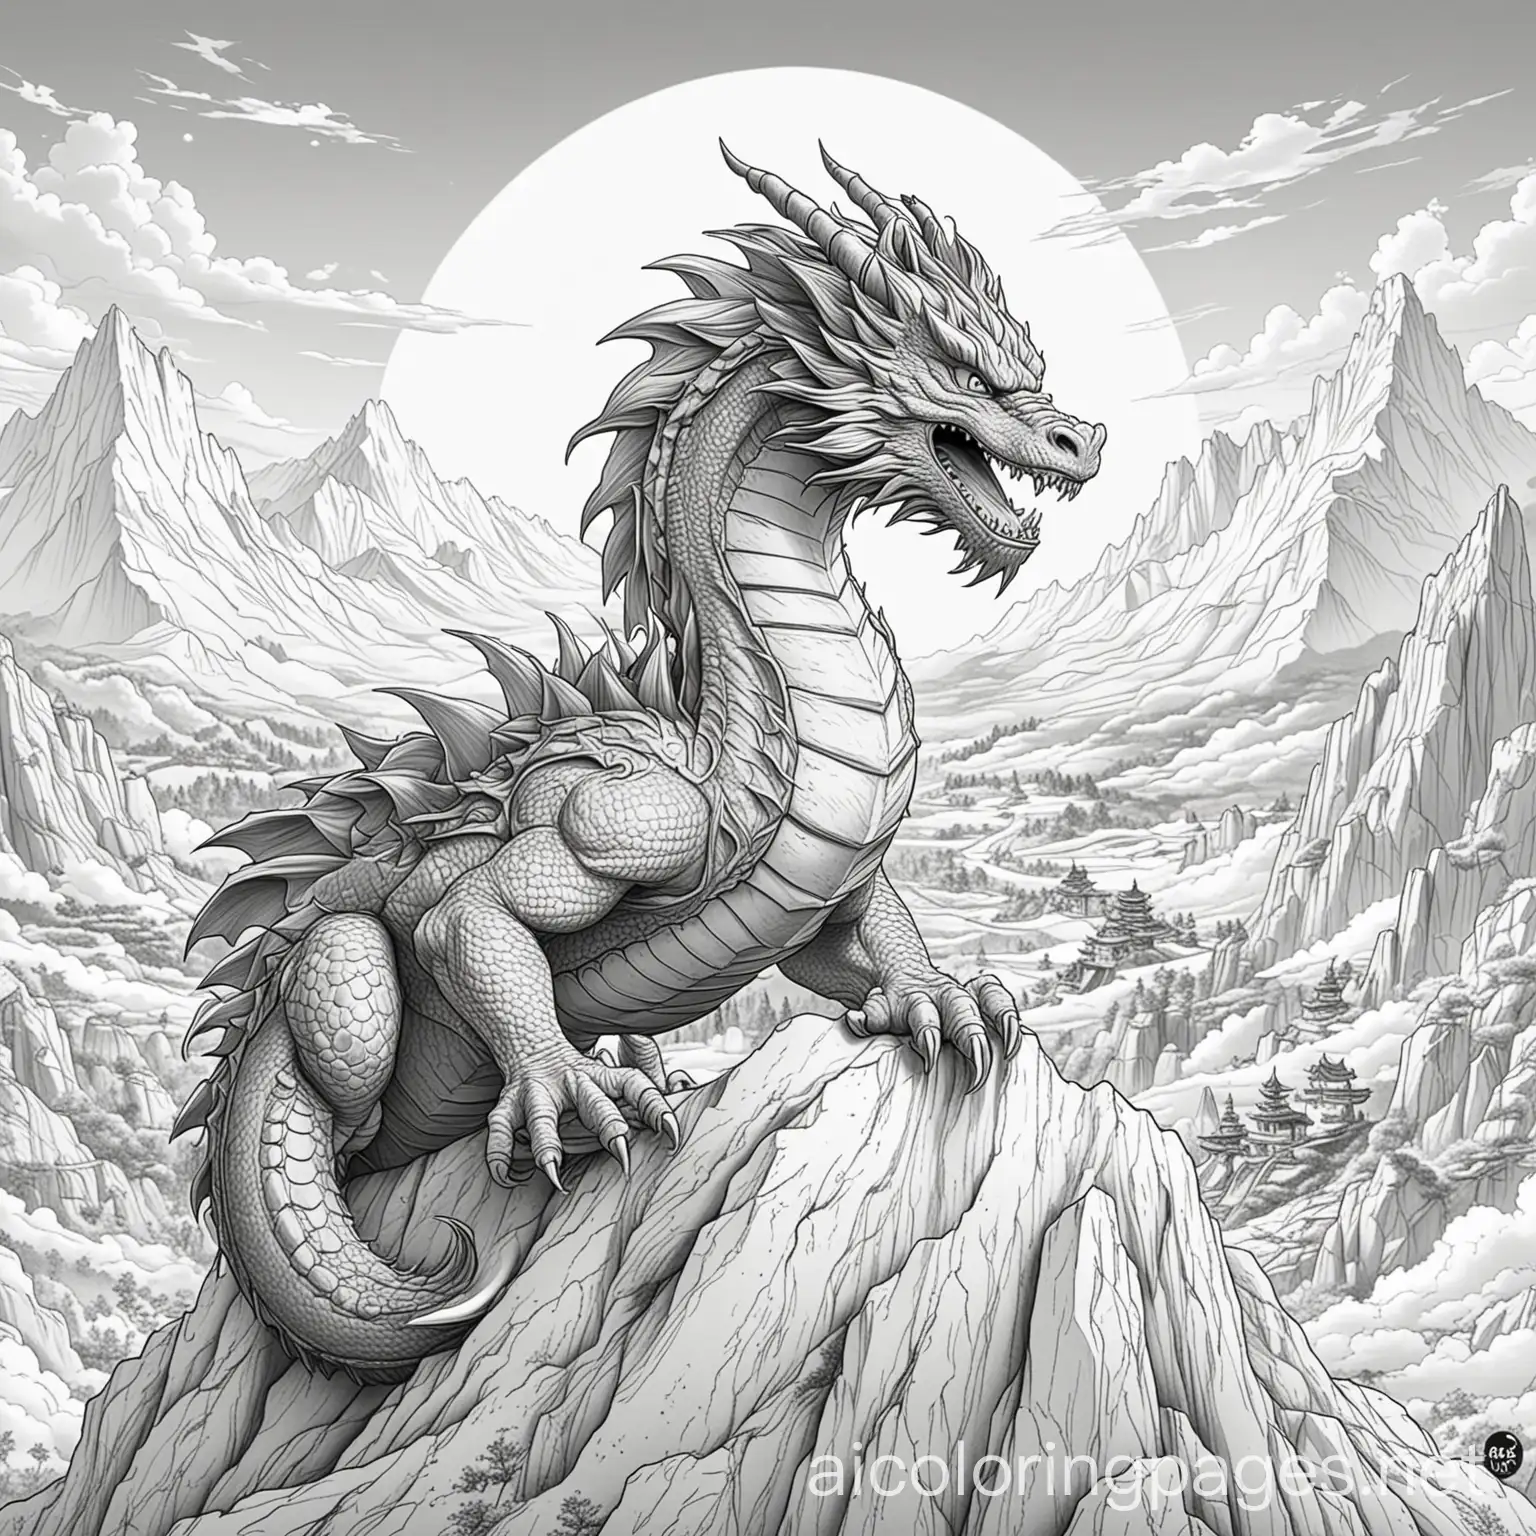 UN DRAGON EN UNA MONTAÑA CON GOKU, Coloring Page, black and white, line art, white background, Simplicity, Ample White Space. The background of the coloring page is plain white to make it easy for young children to color within the lines. The outlines of all the subjects are easy to distinguish, making it simple for kids to color without too much difficulty